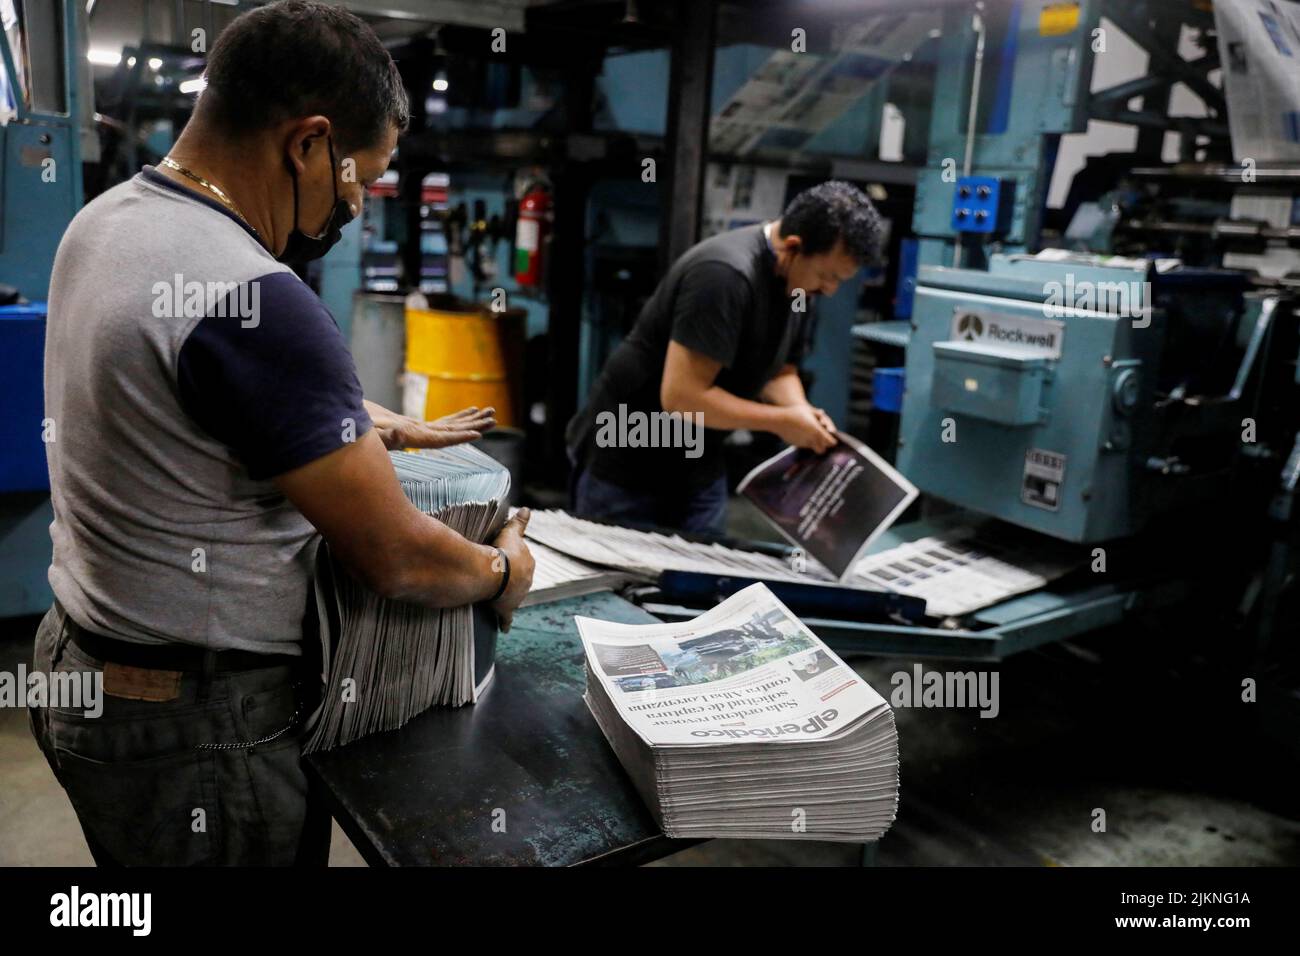 Employees print copies at the facility of the elPeriodico newspaper, an outlet famous for investigations that have revealed several cases of government corruption, following the detention of its founder Jose Ruben Zamora Marroquin by Guatemalan authorities, in Guatemala City, Guatemala, August 2, 2022. REUTERS/Luis Echeverria Stock Photo